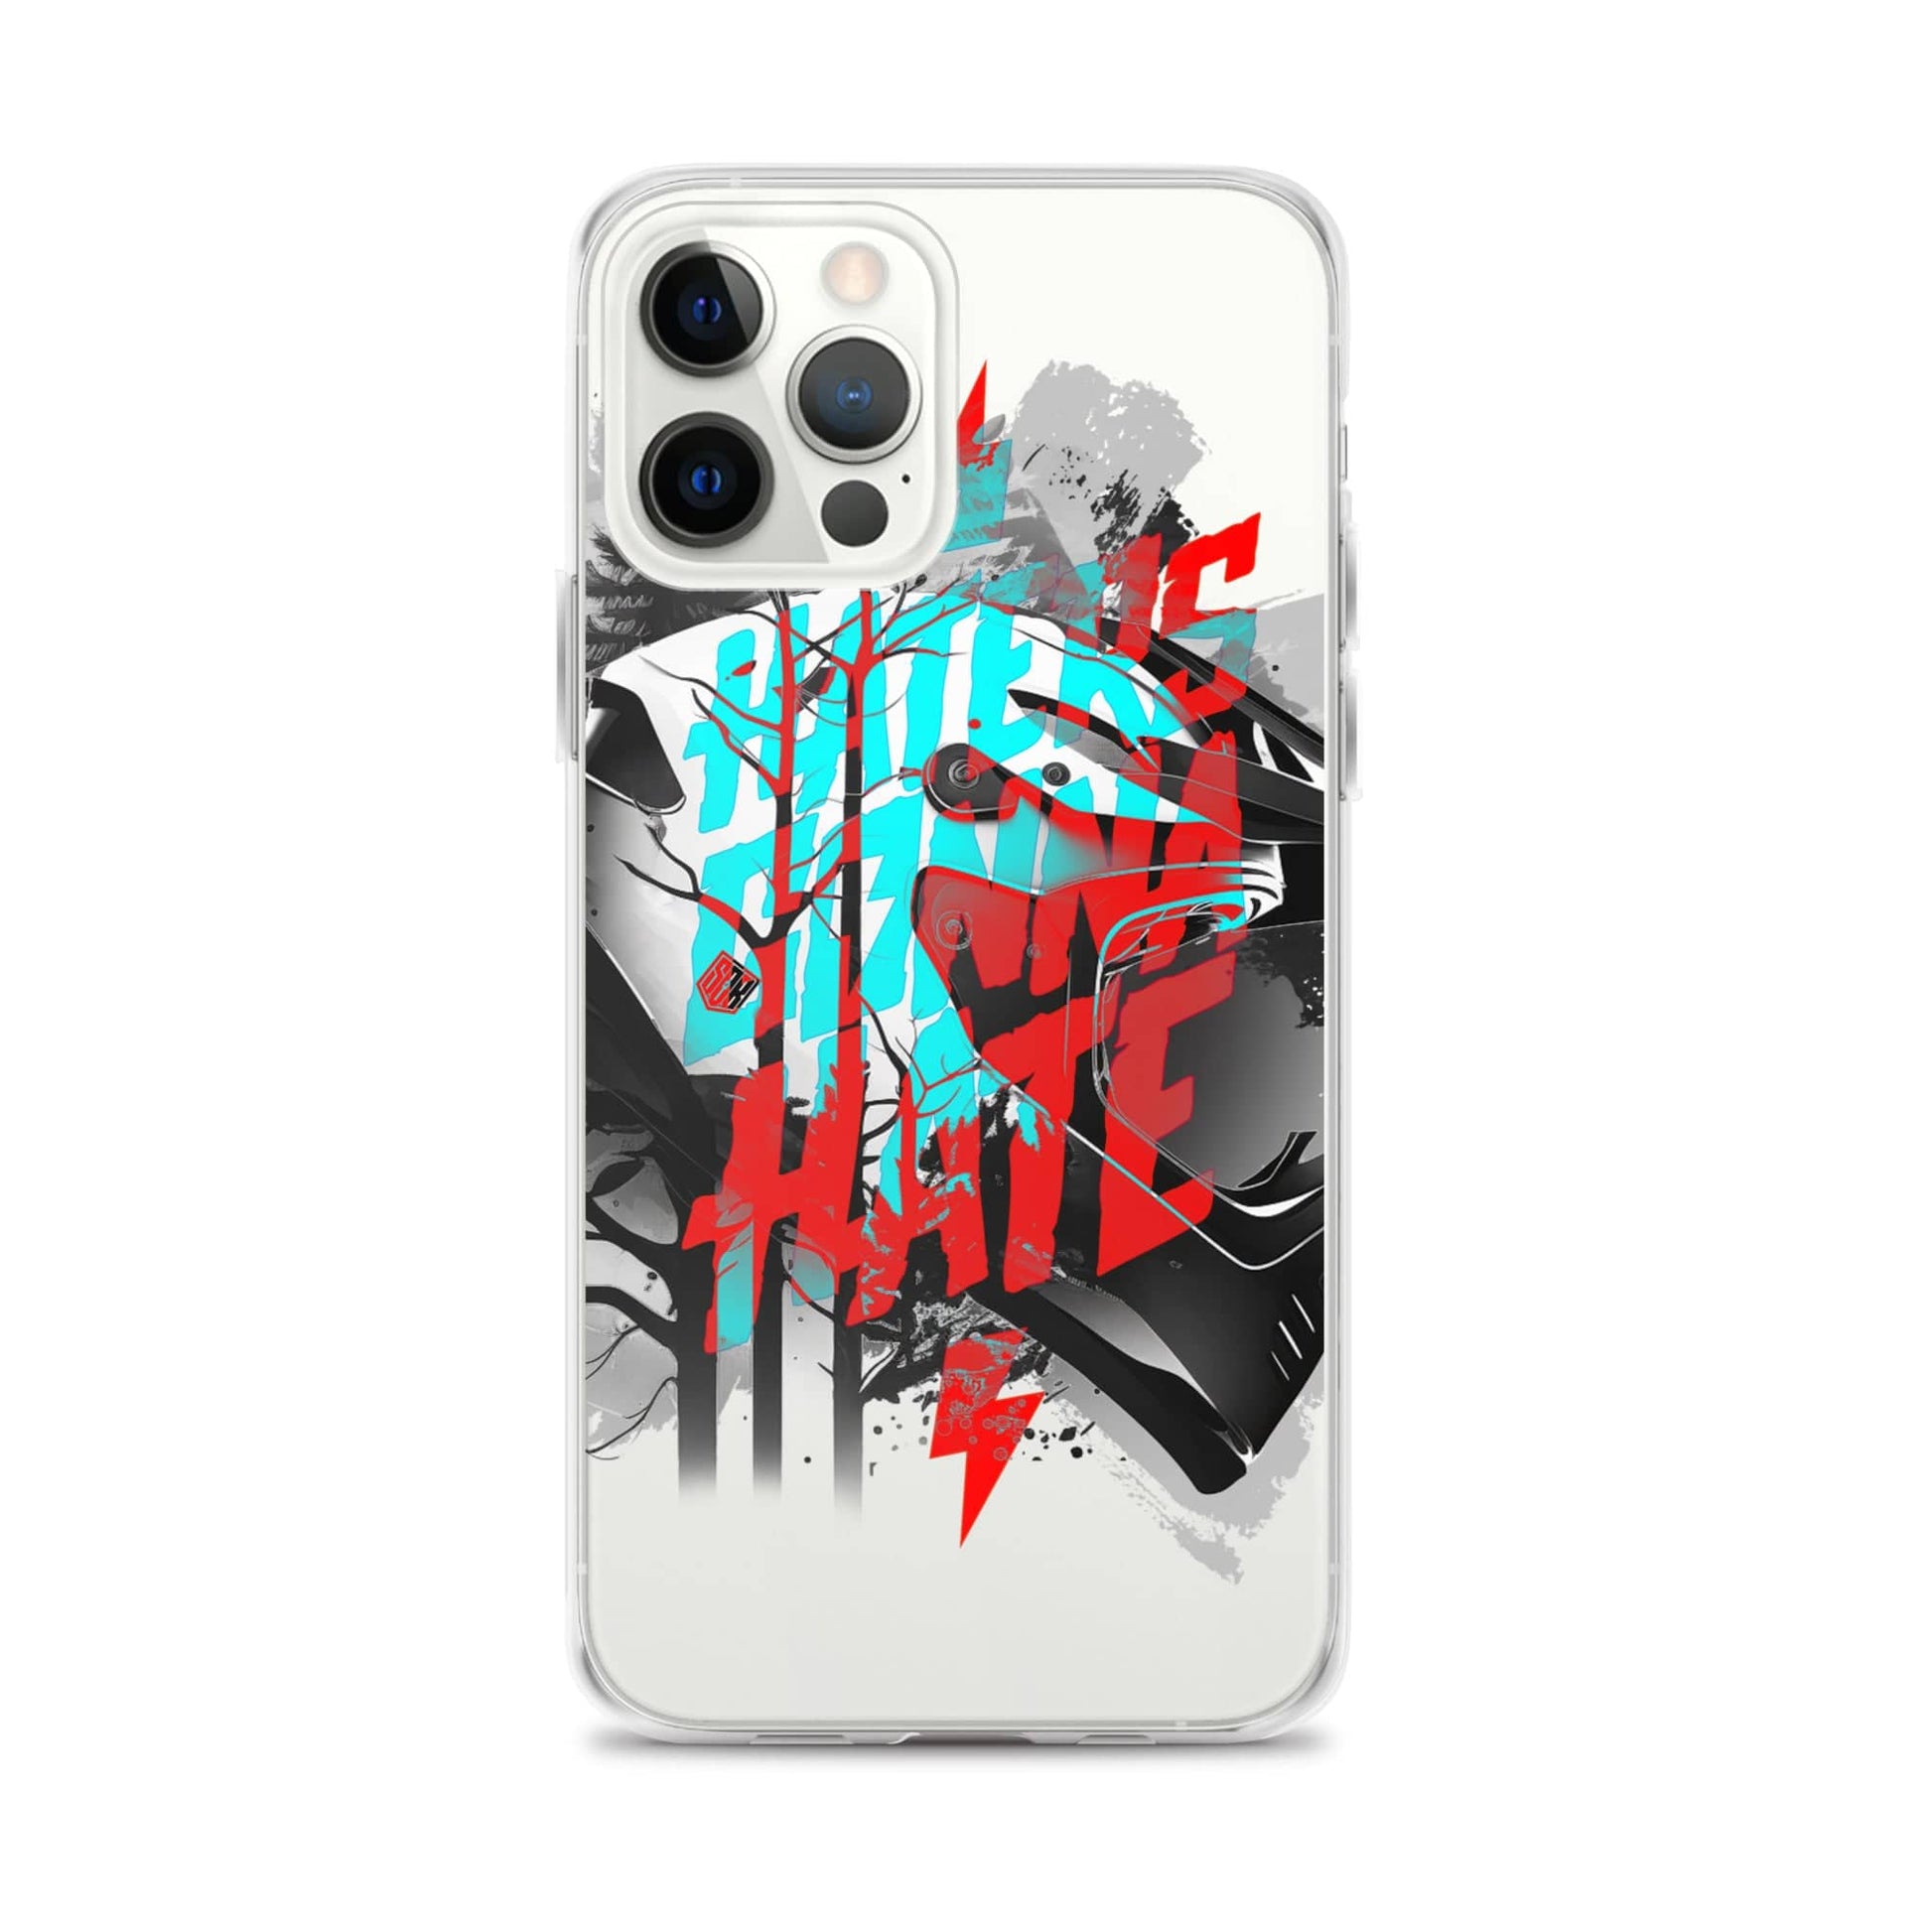 Sons of Battery® - E-MTB Brand & Community iPhone 12 Pro Max Haters gonna hate - iPhone-Hülle E-Bike-Community